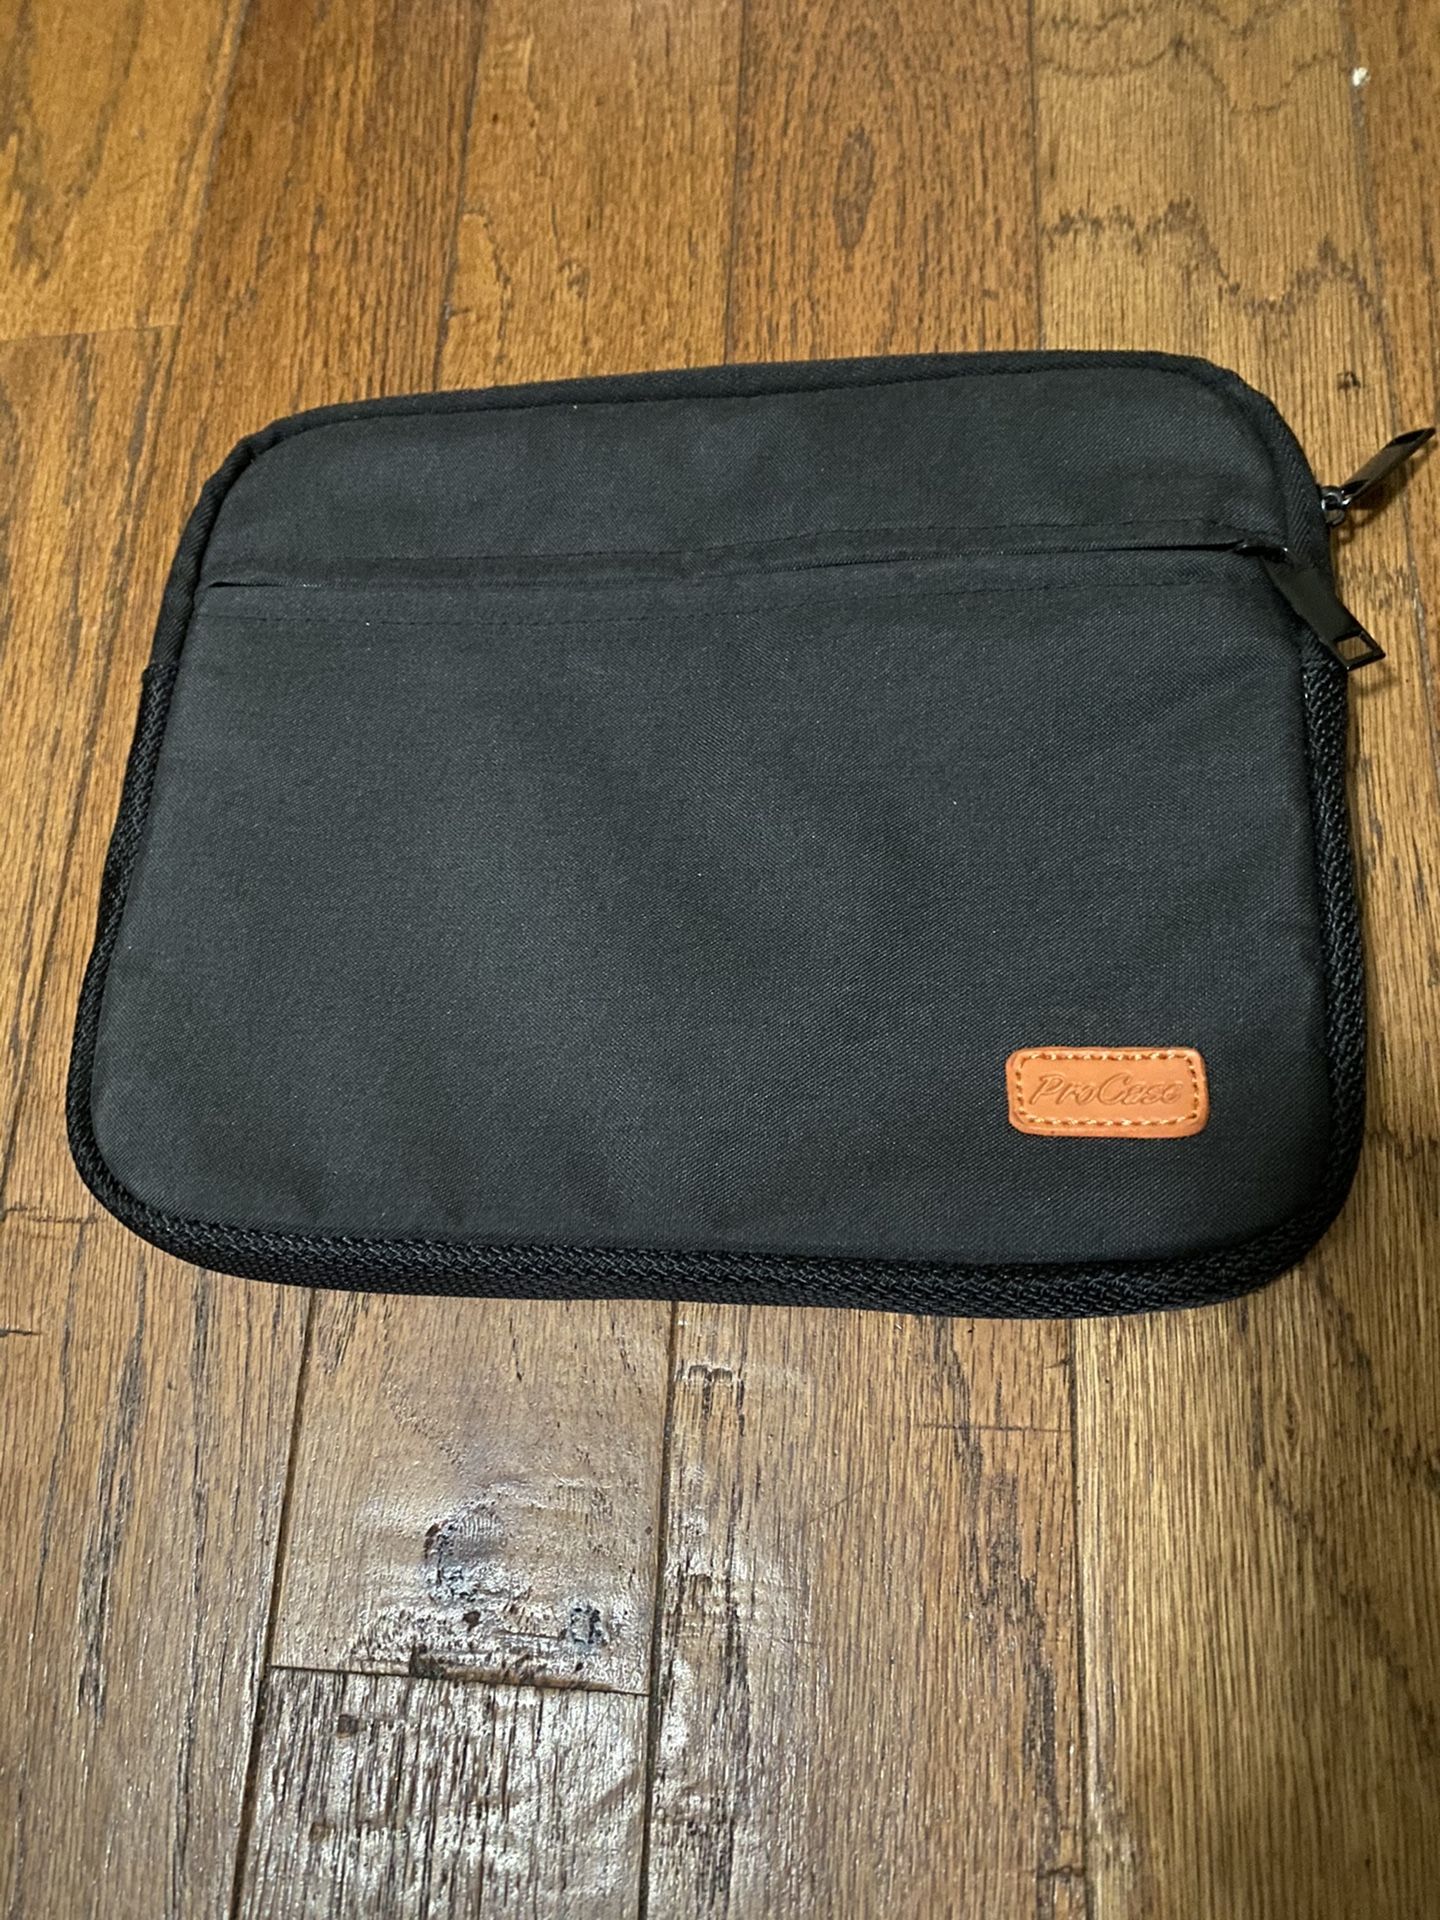 Pro Case Black Small/ Medium Case With 2 Zippers